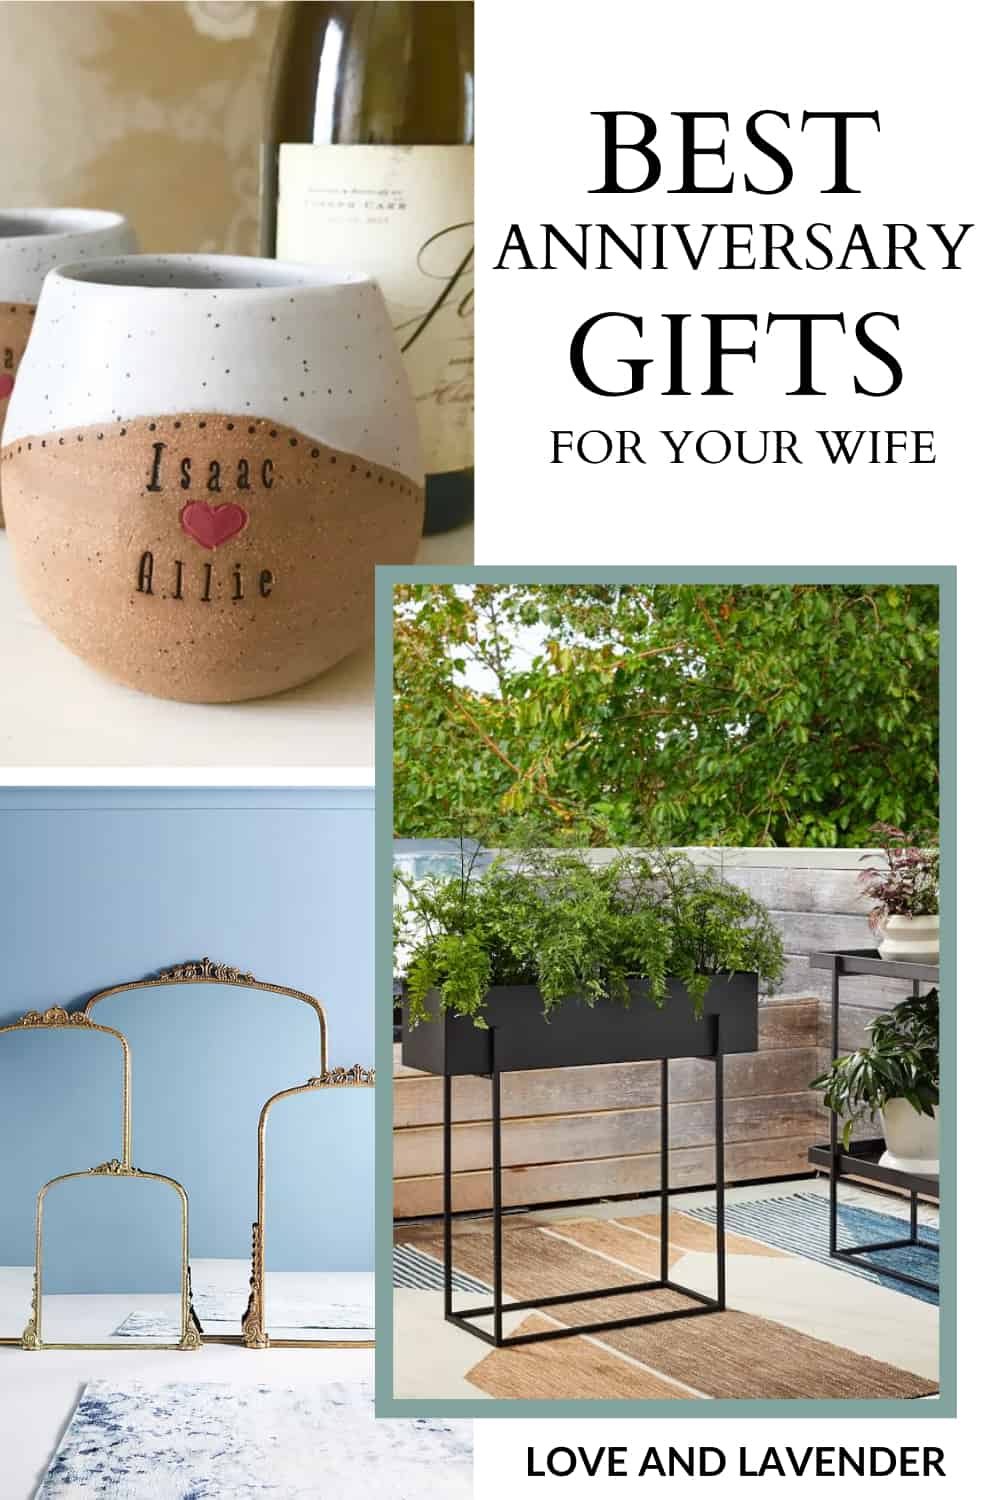 Pinterest pin - Top Anniversary Gift Ideas for Your Wife